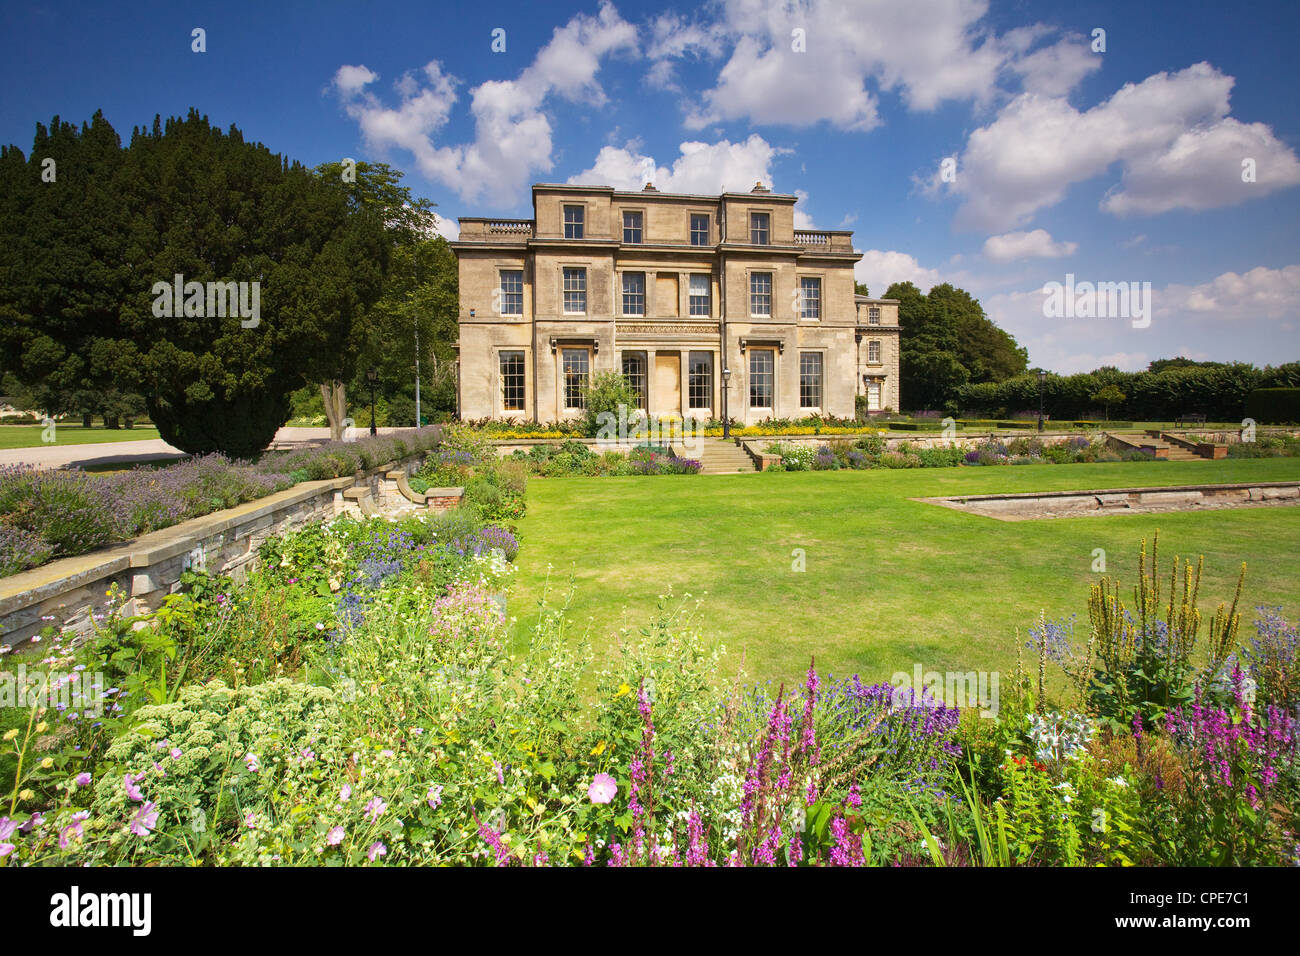 Normanby Hall Regency Mansion near Scunthorpe in North Lincolnshire, England. Former home of the Sheffield family. Stock Photo